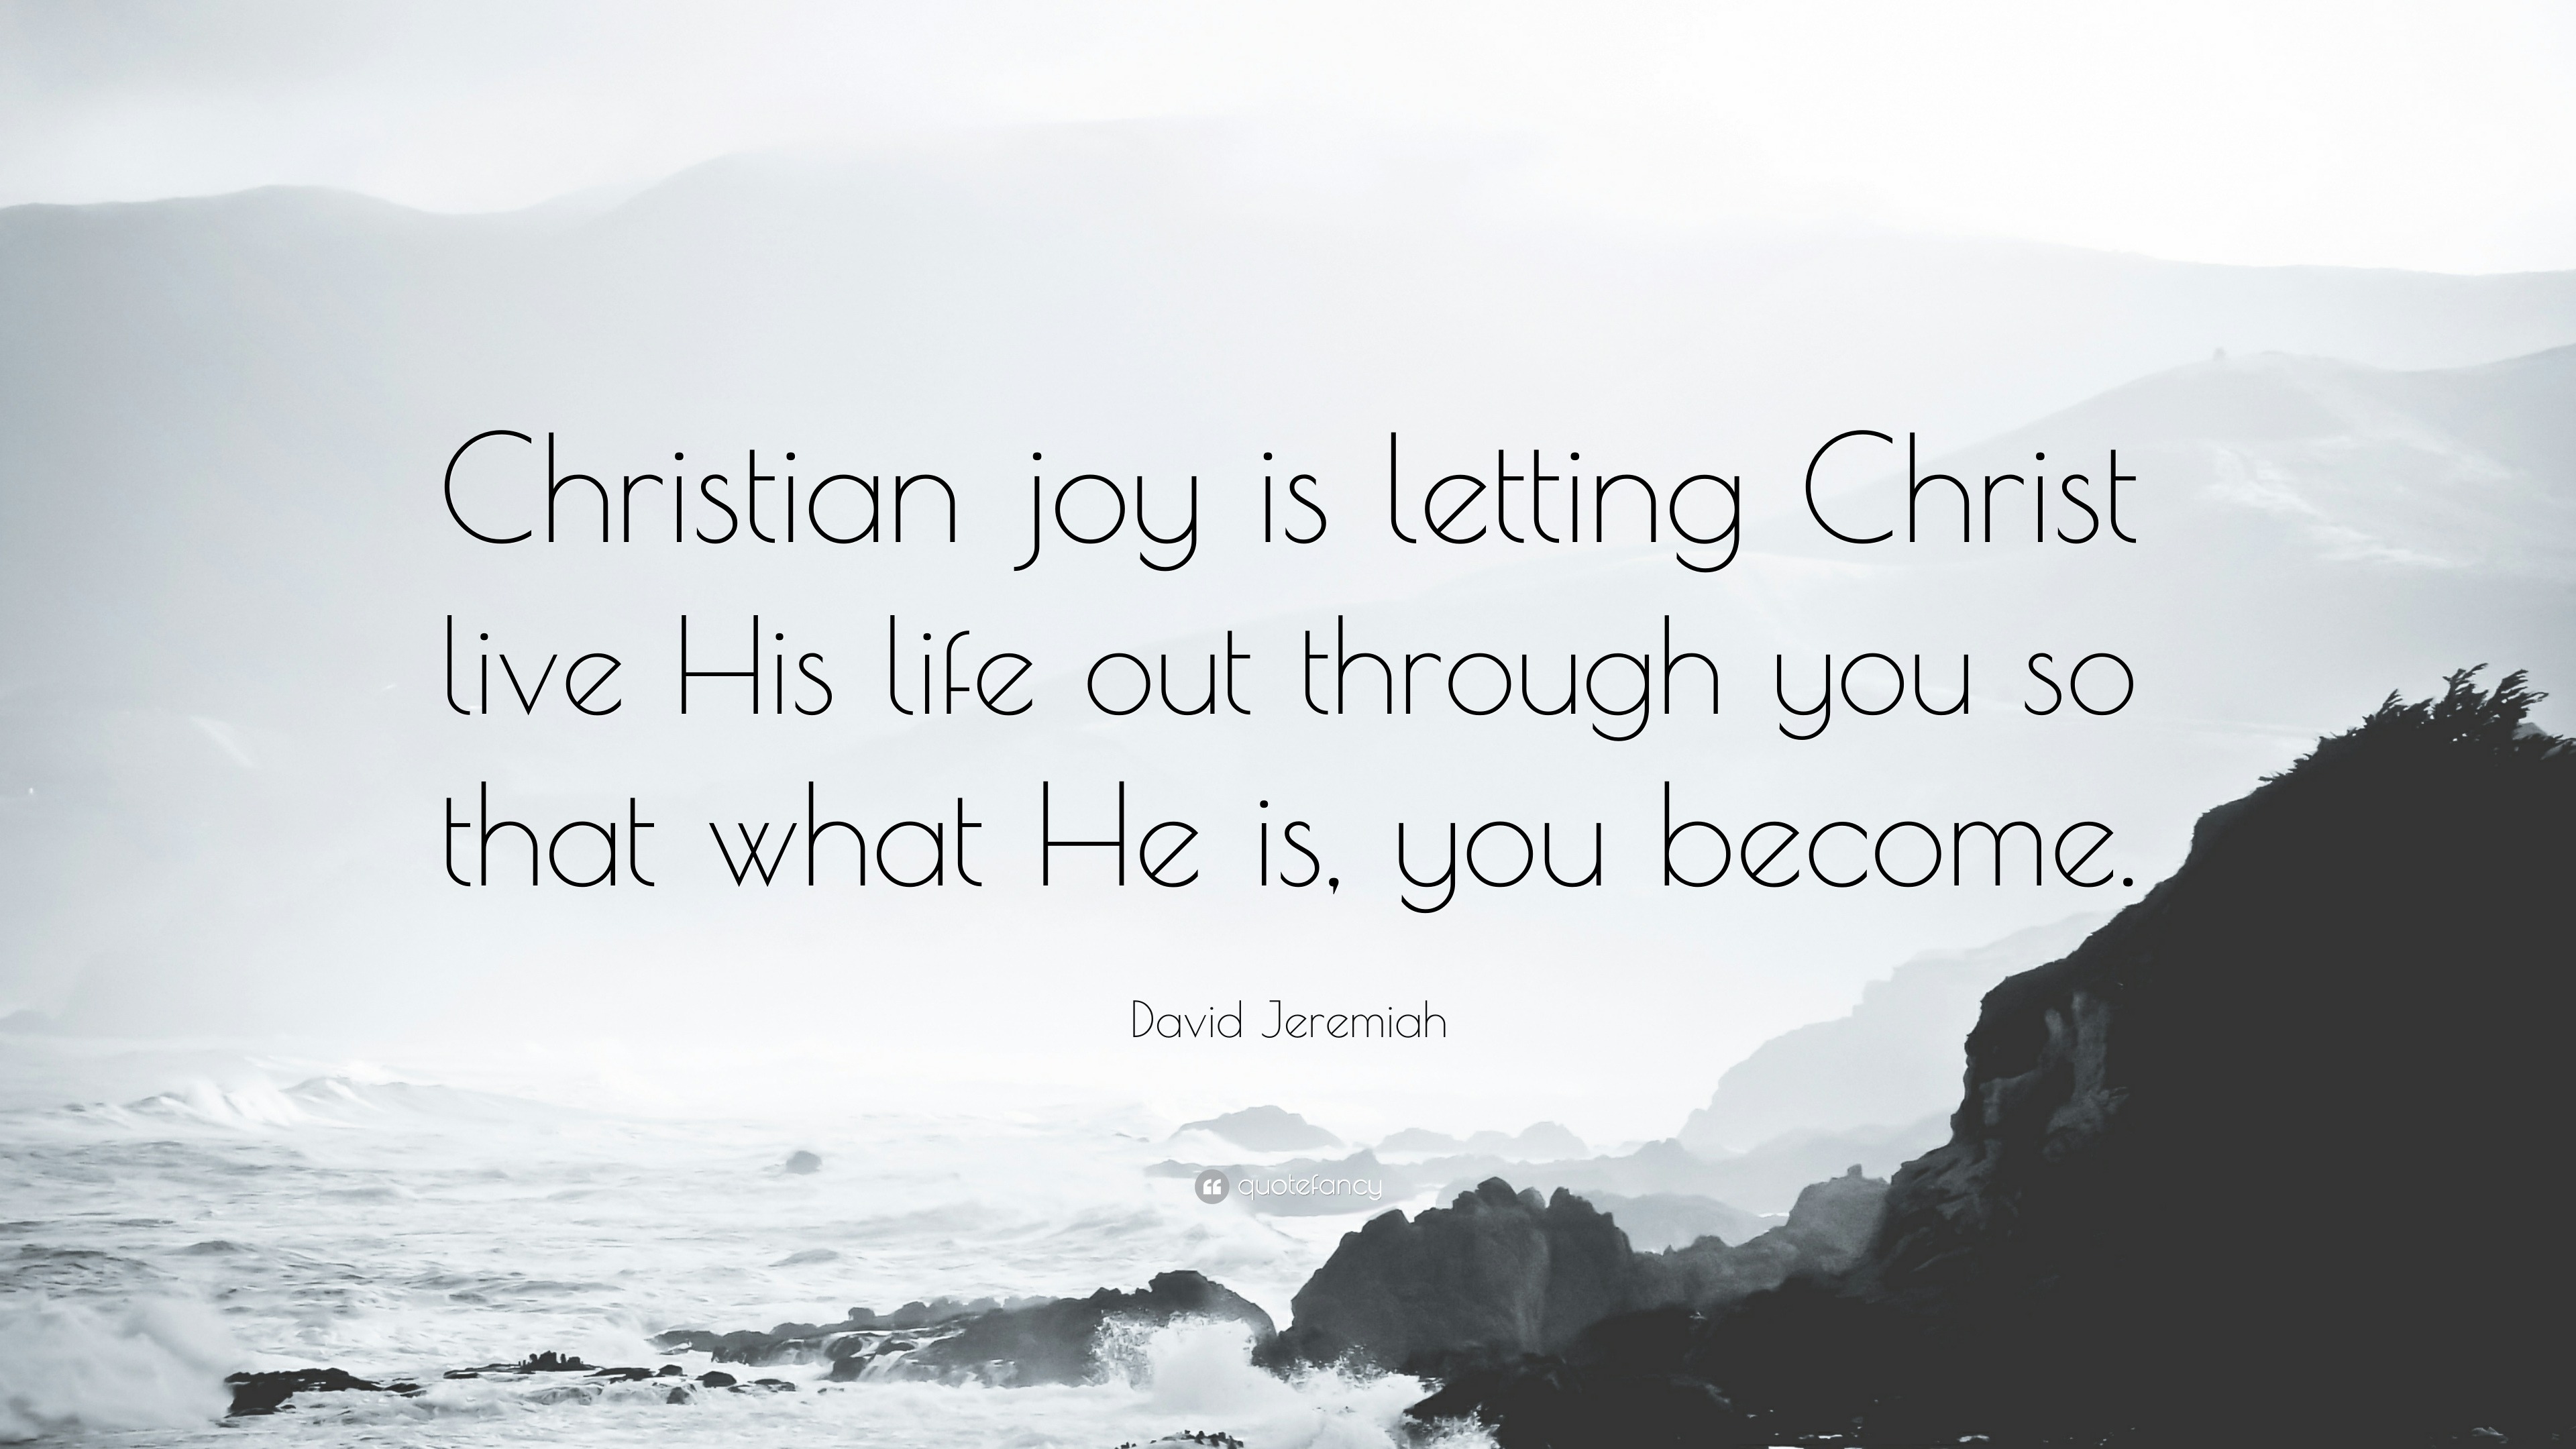 David Jeremiah Quote “Christian joy is letting Christ live His life